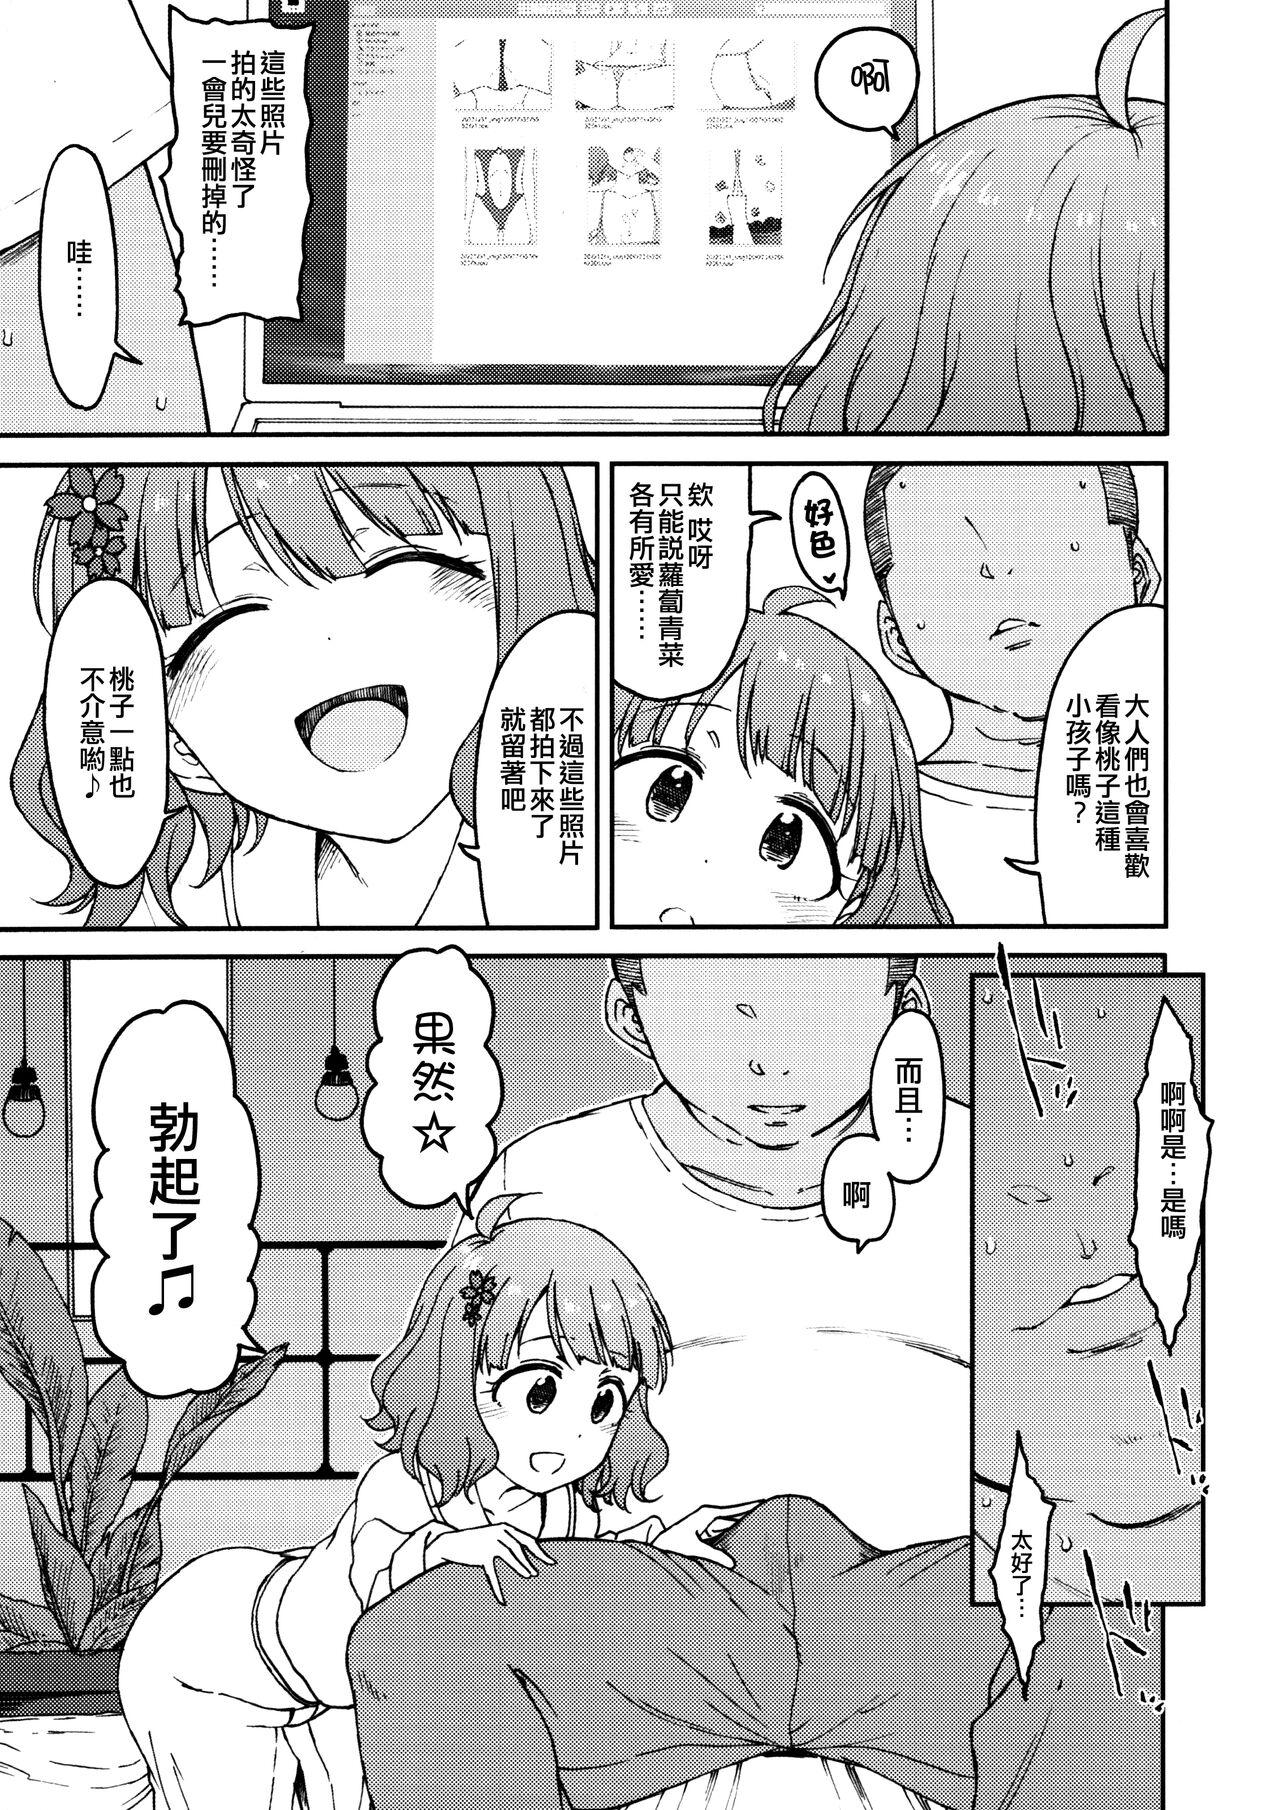 Delicia Candy Wrapper - The idolmaster Old Man - Page 12